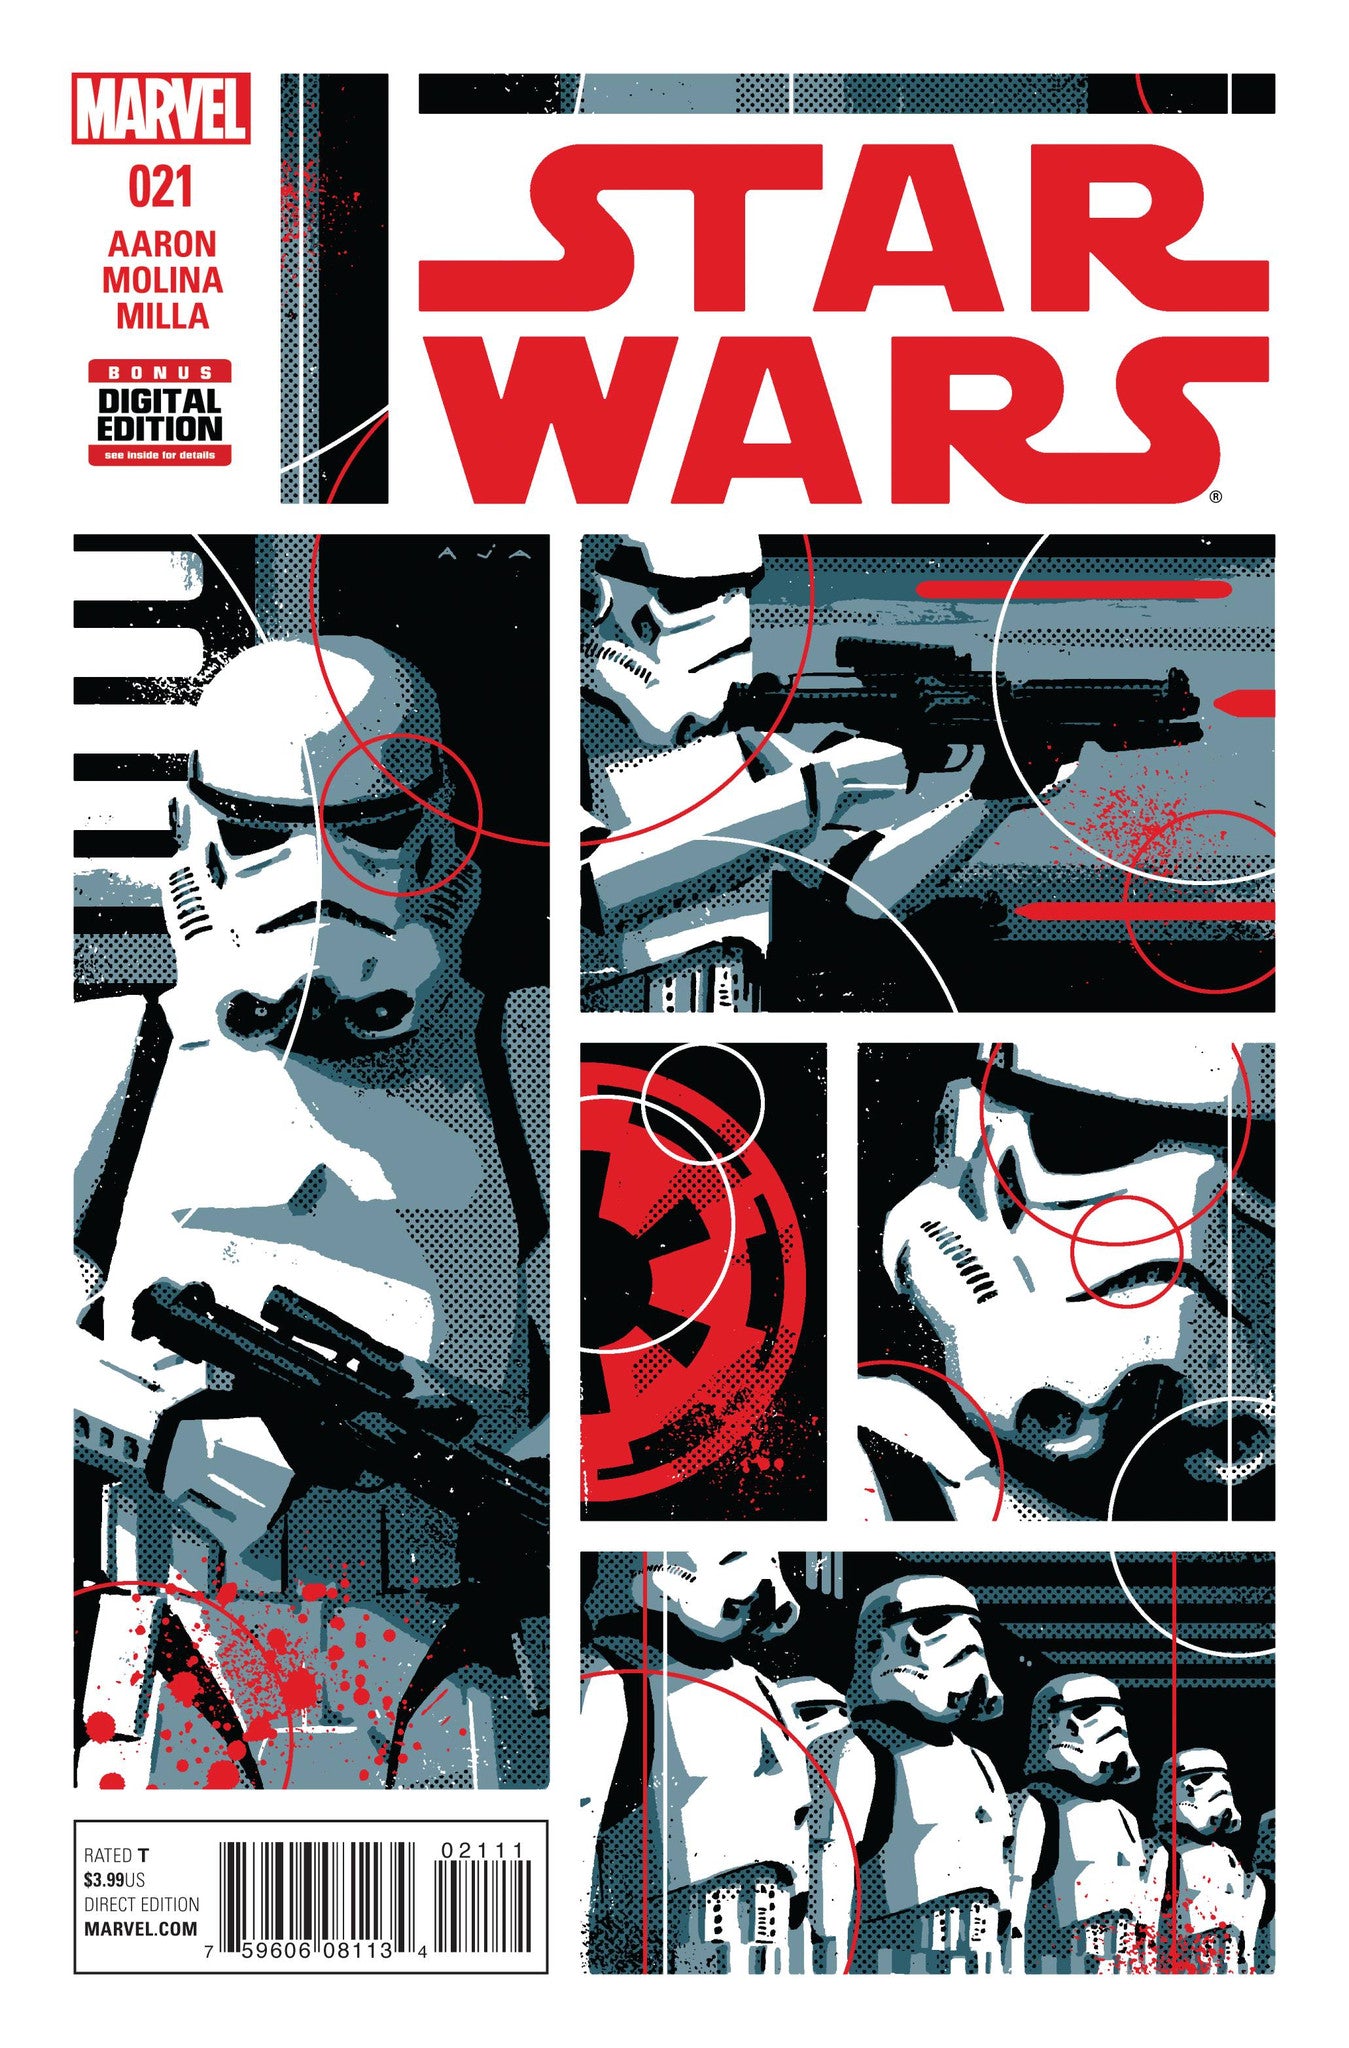 STAR WARS #21 COVER